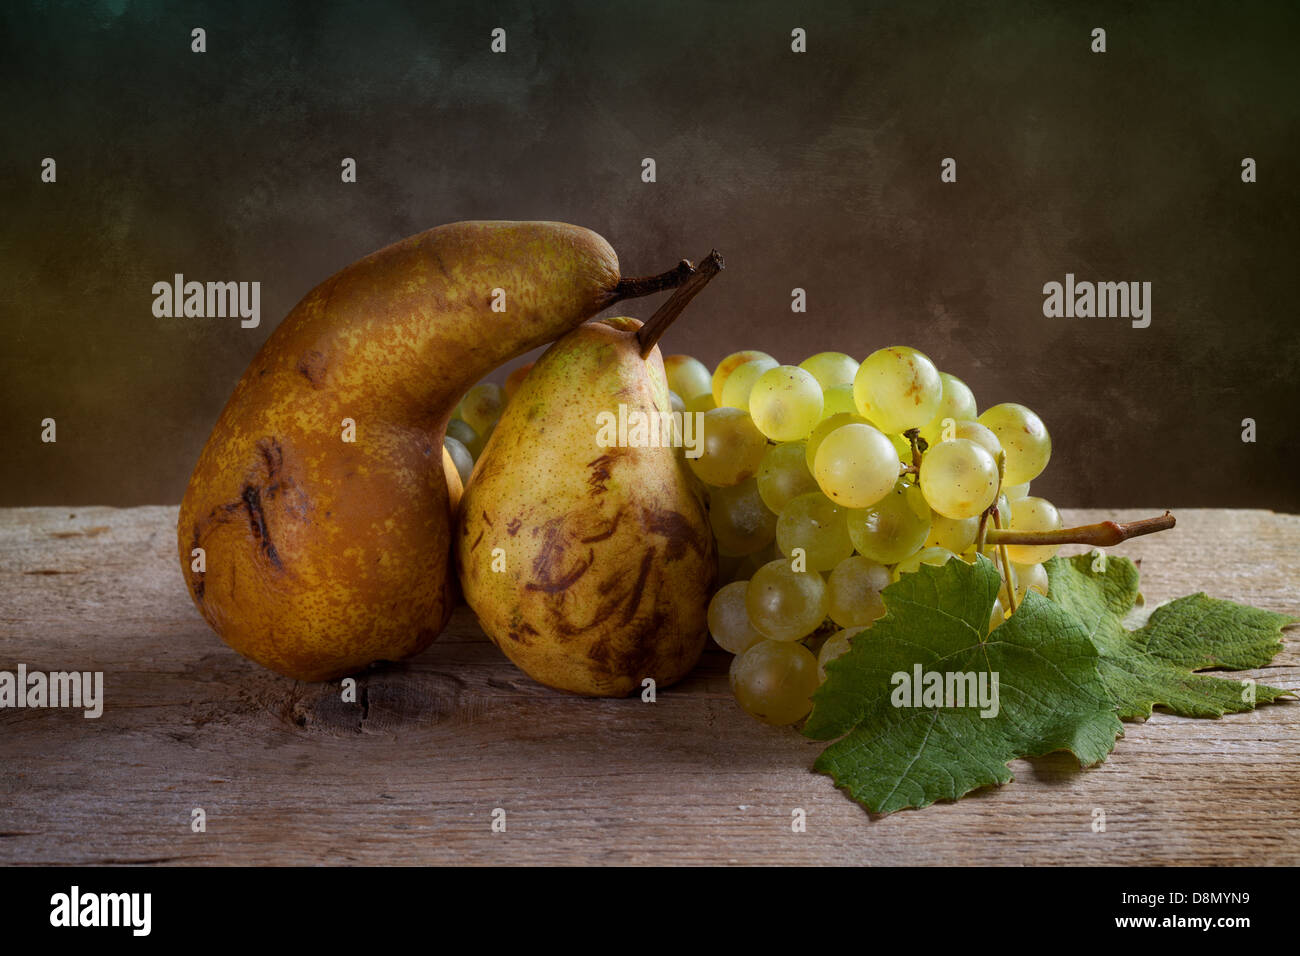 Pears and Grapes Stock Photo